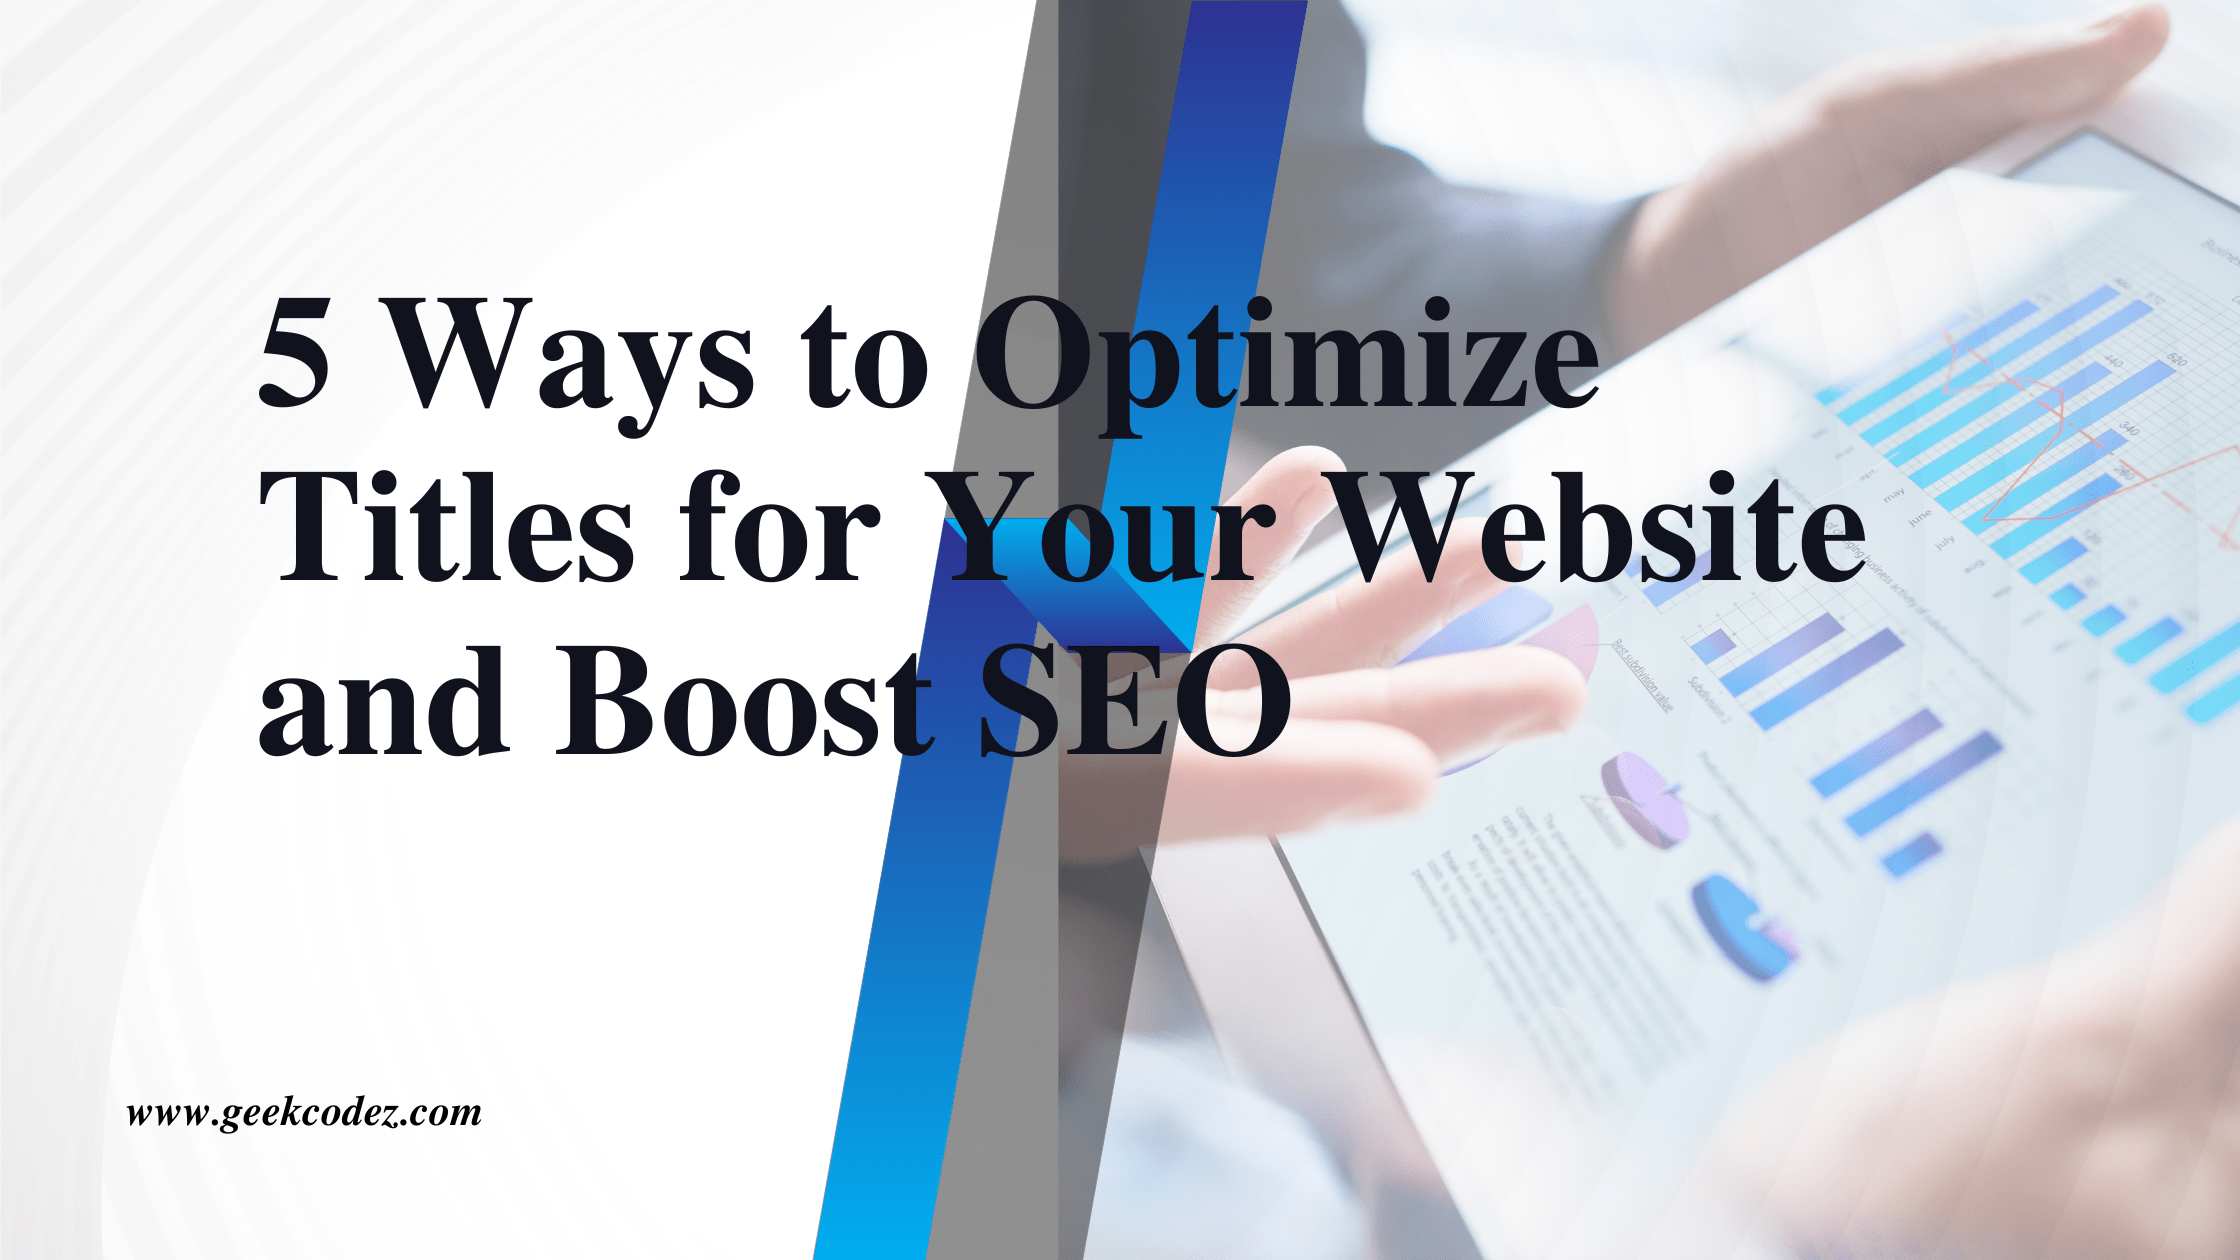 5 Ways to Optimize Titles for Your Website and Boost SEO